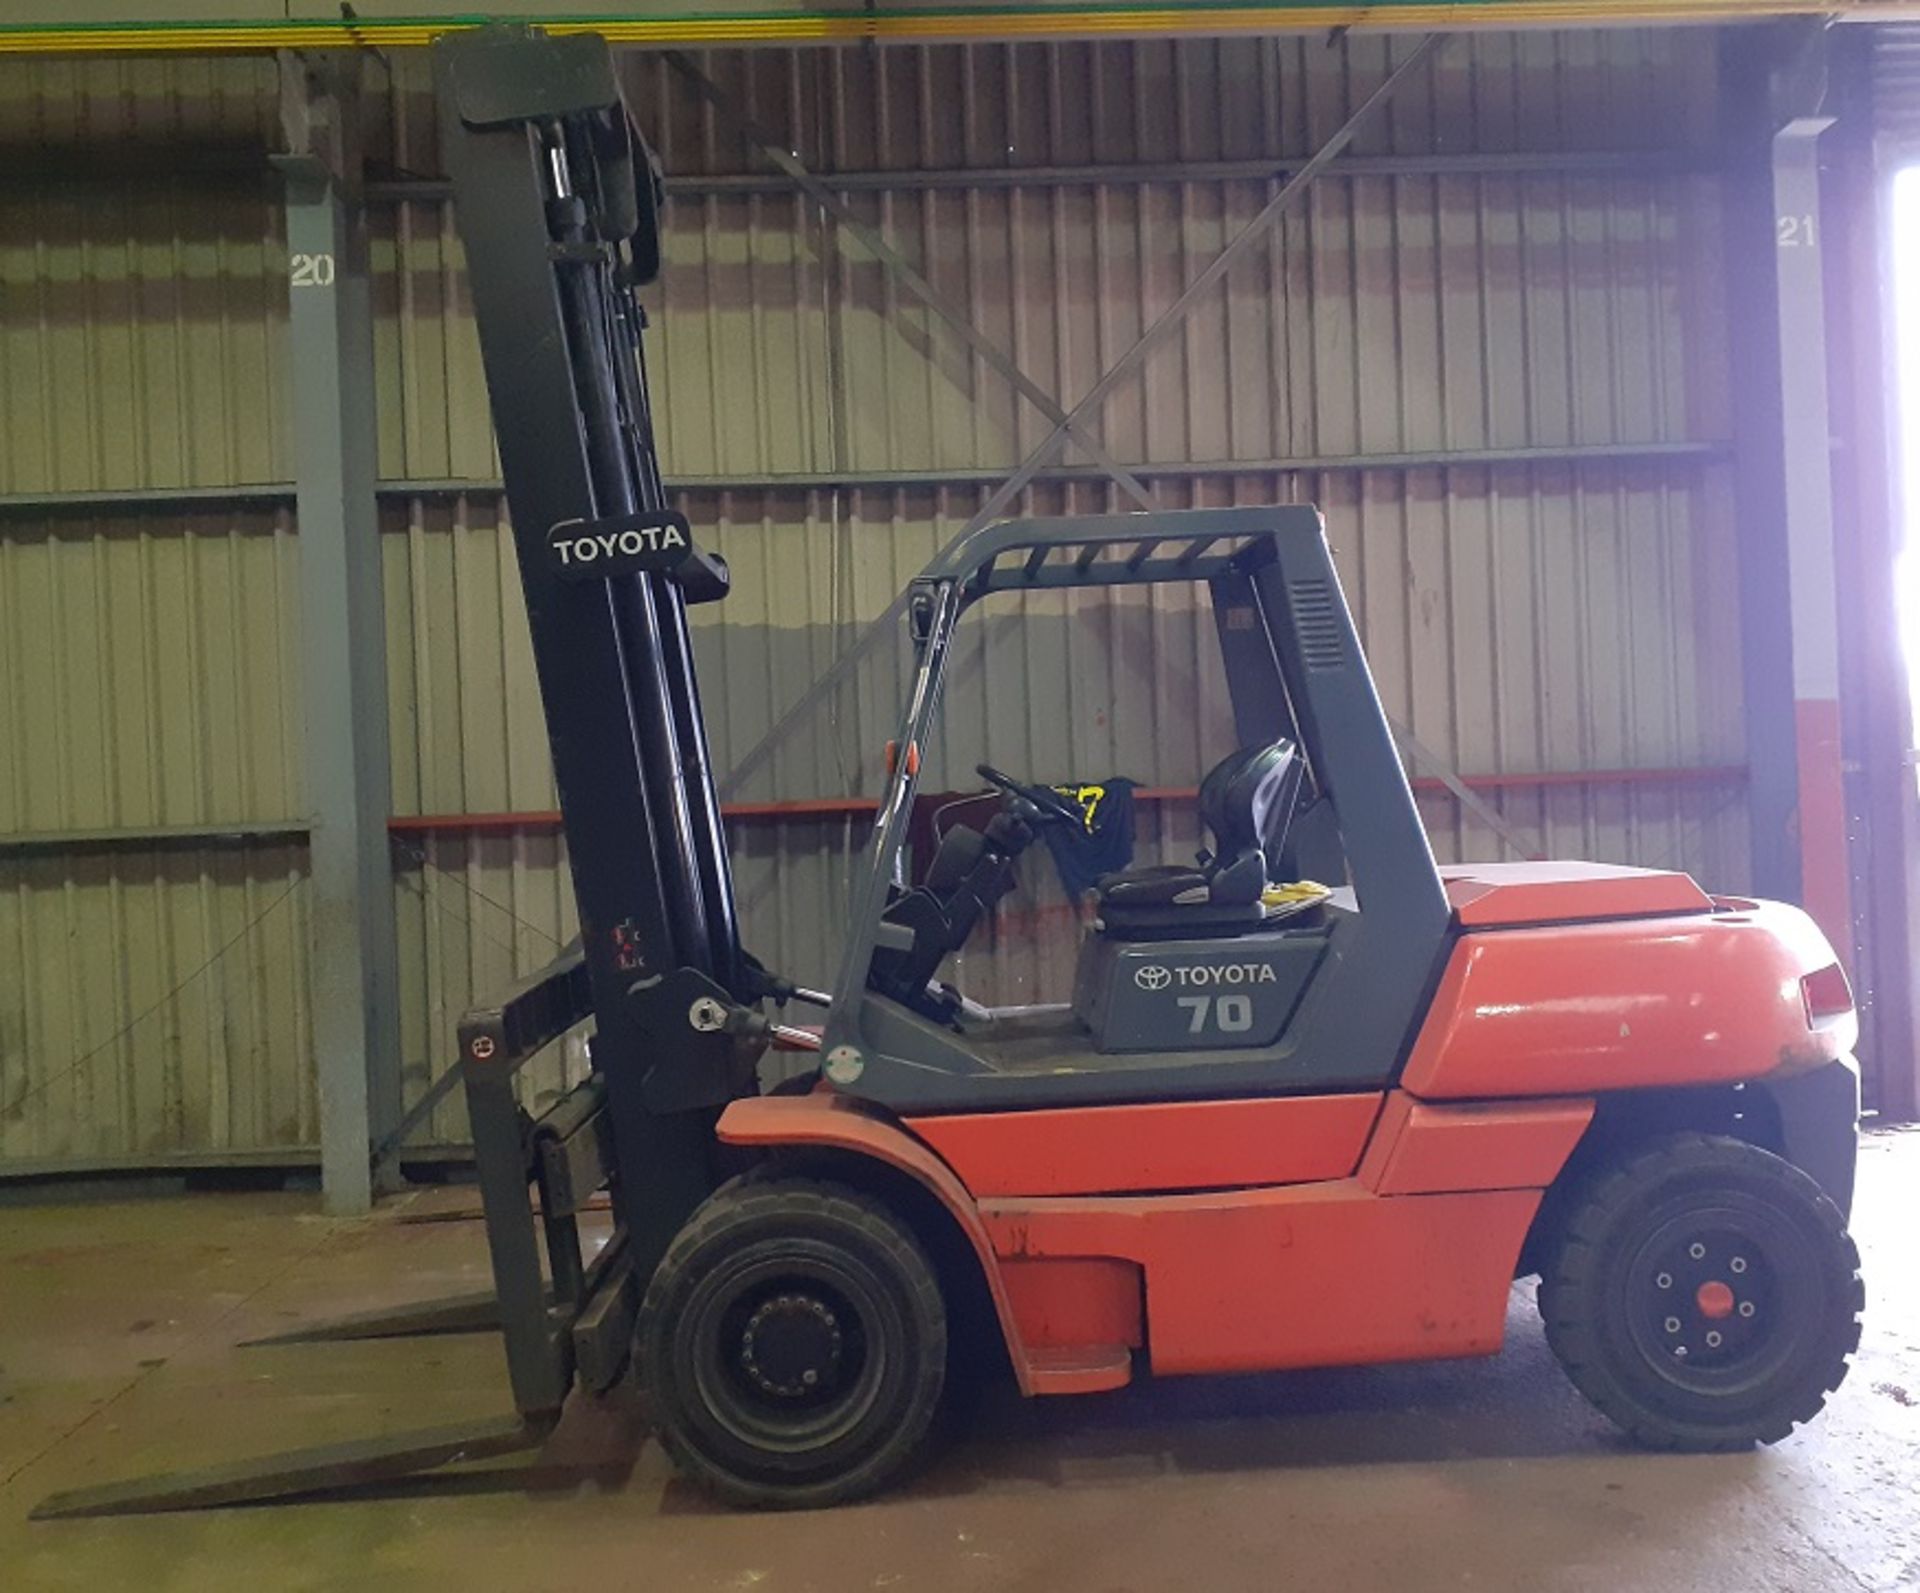 Toyota 50-5FD70D 7000kg Forklift Truck, max height 4.8m Serial Number 50SFD7OE3025 (2012) fitted